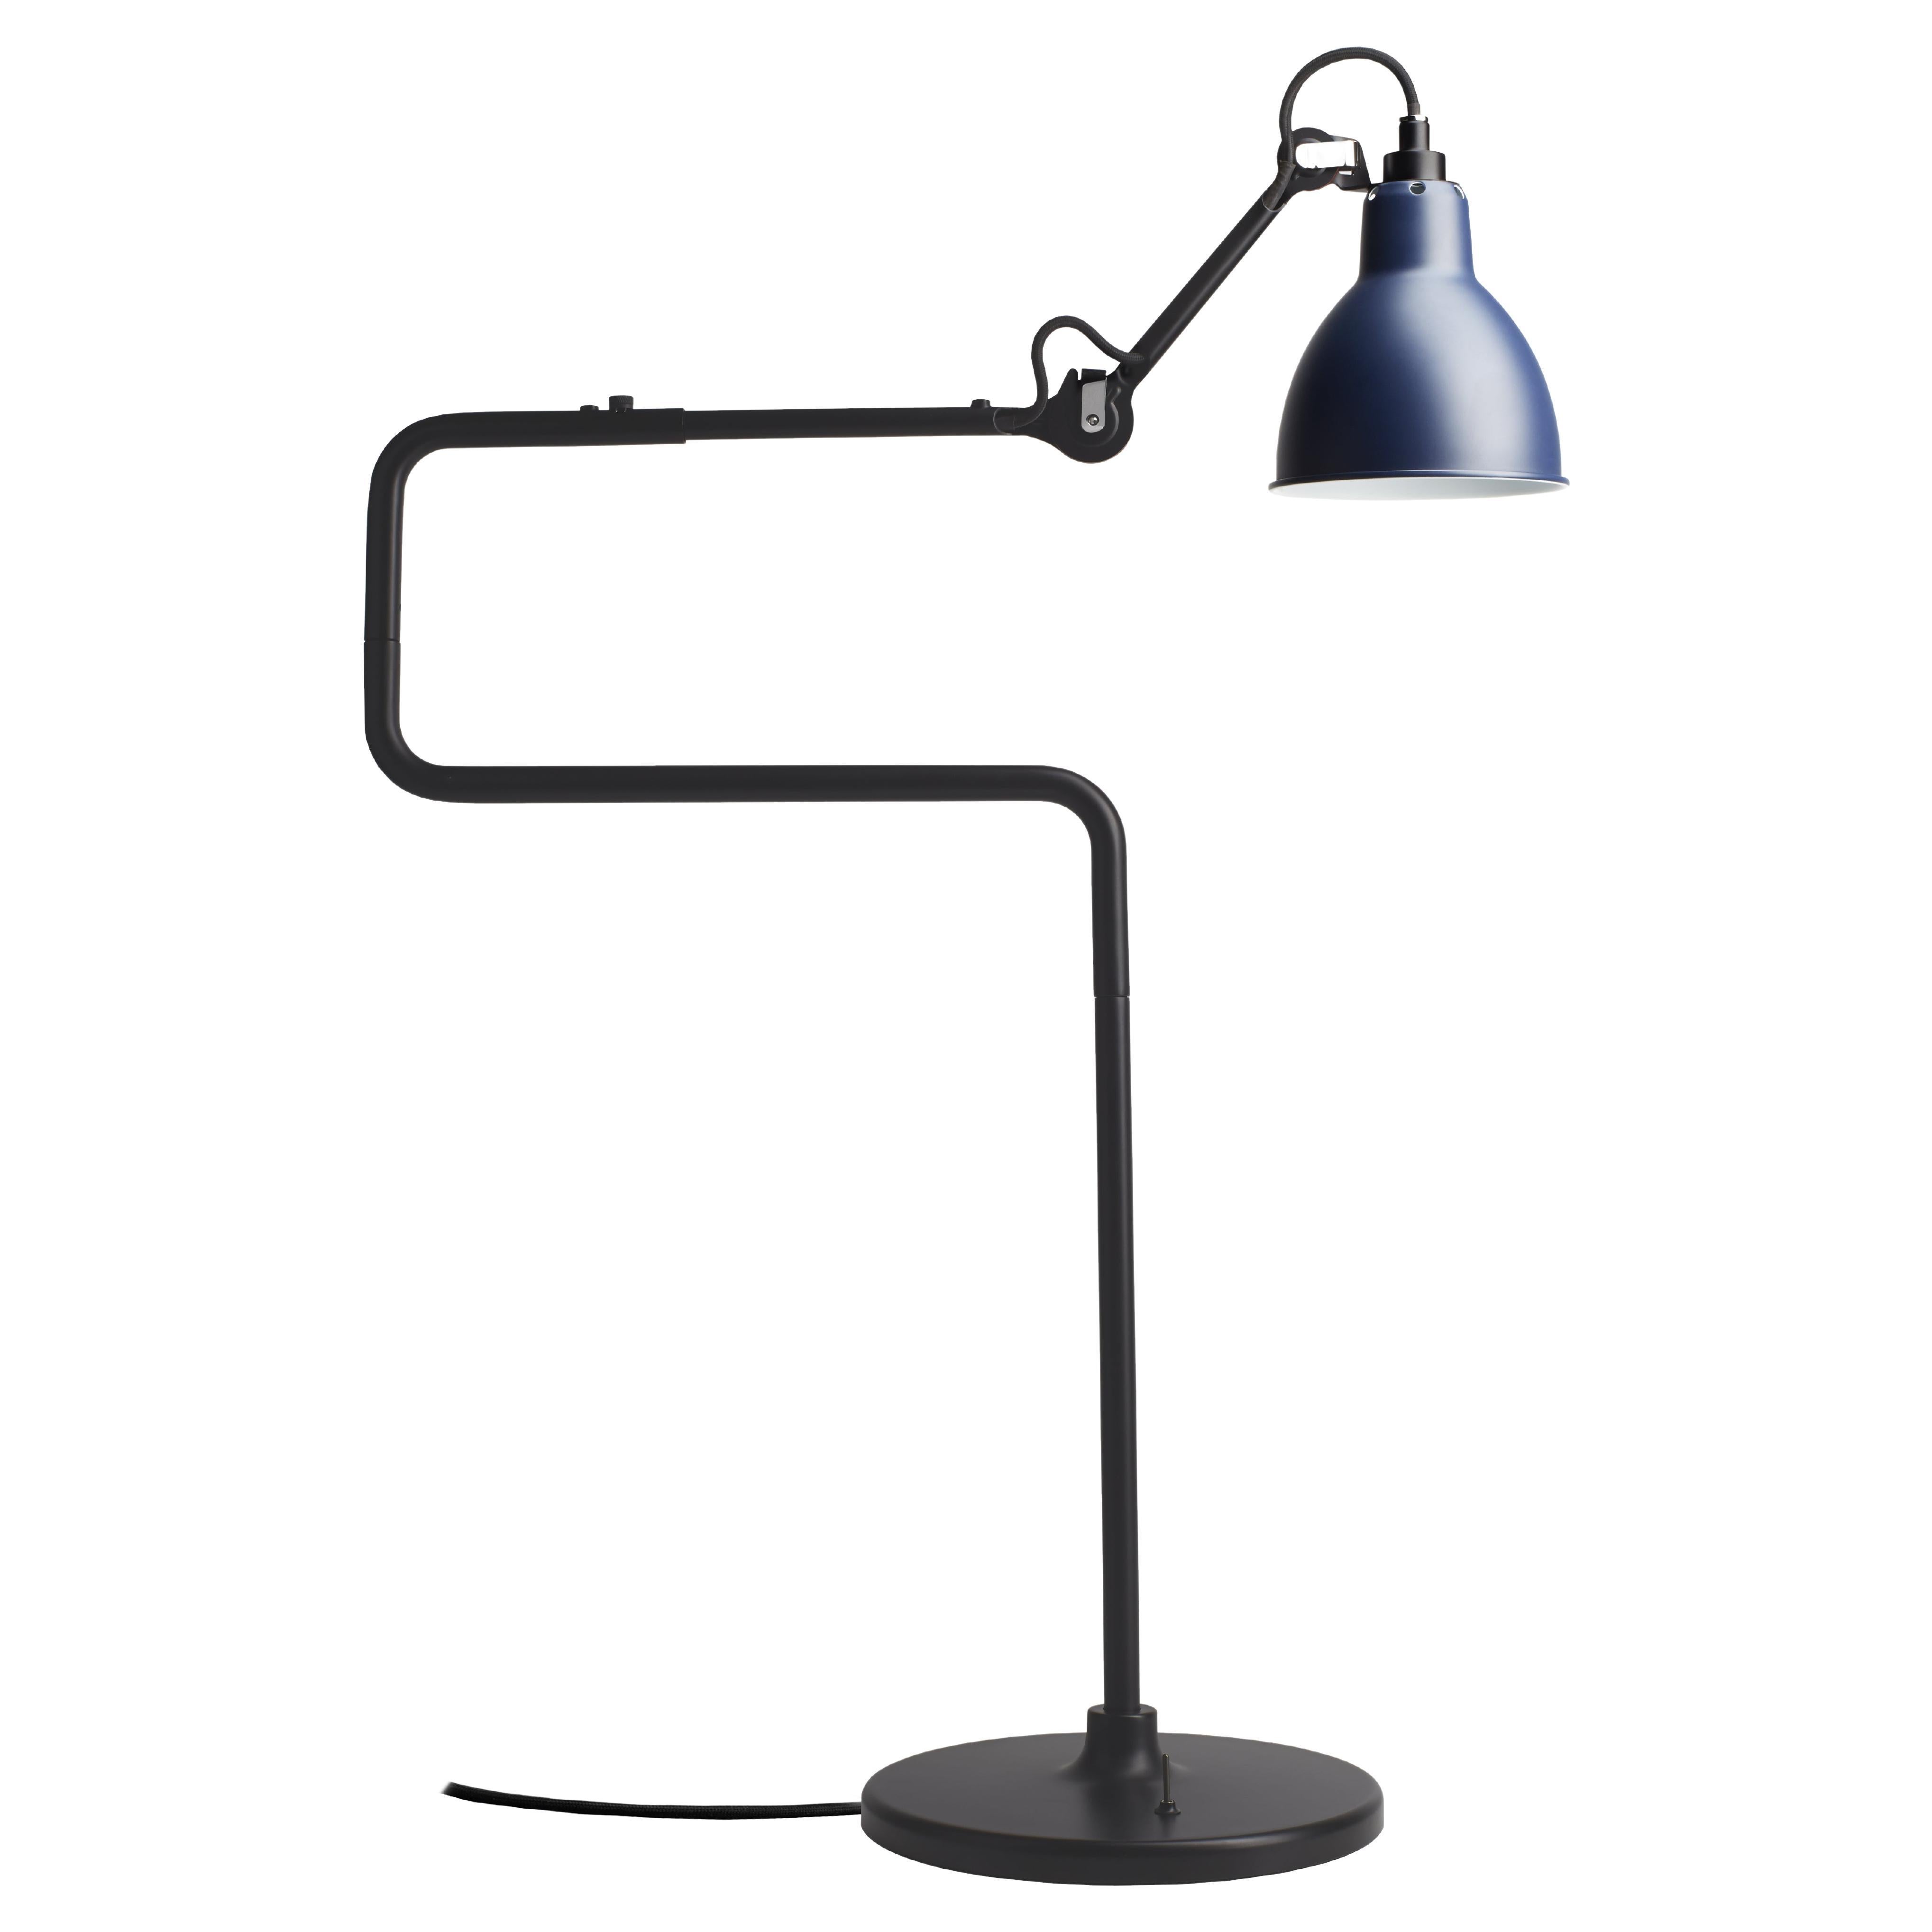 DCW Editions La Lampe Gras N°317 Table Lamp in Black Arm with Blue Shade